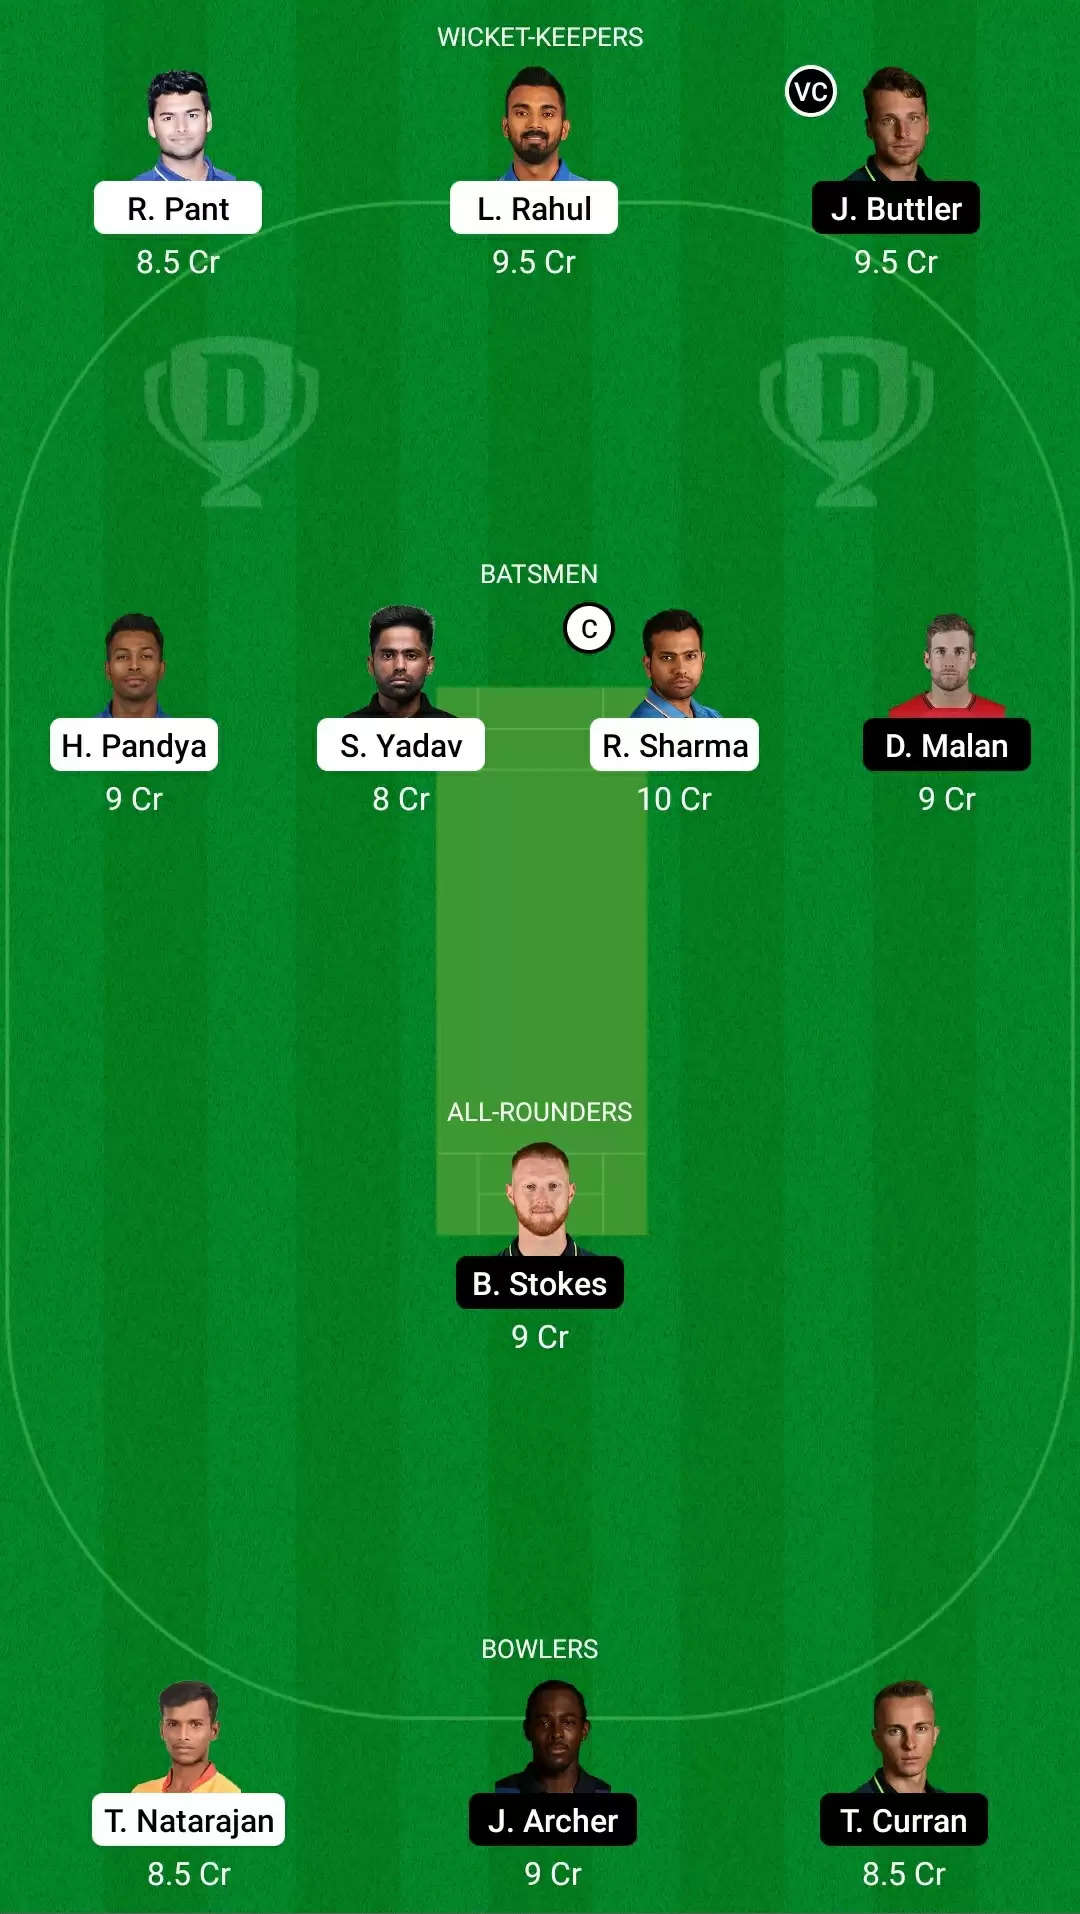 IND vs ENG Dream11 Team Prediction: India vs England Best Fantasy Cricket Tips, Playing XI, Team & Top Player Picks